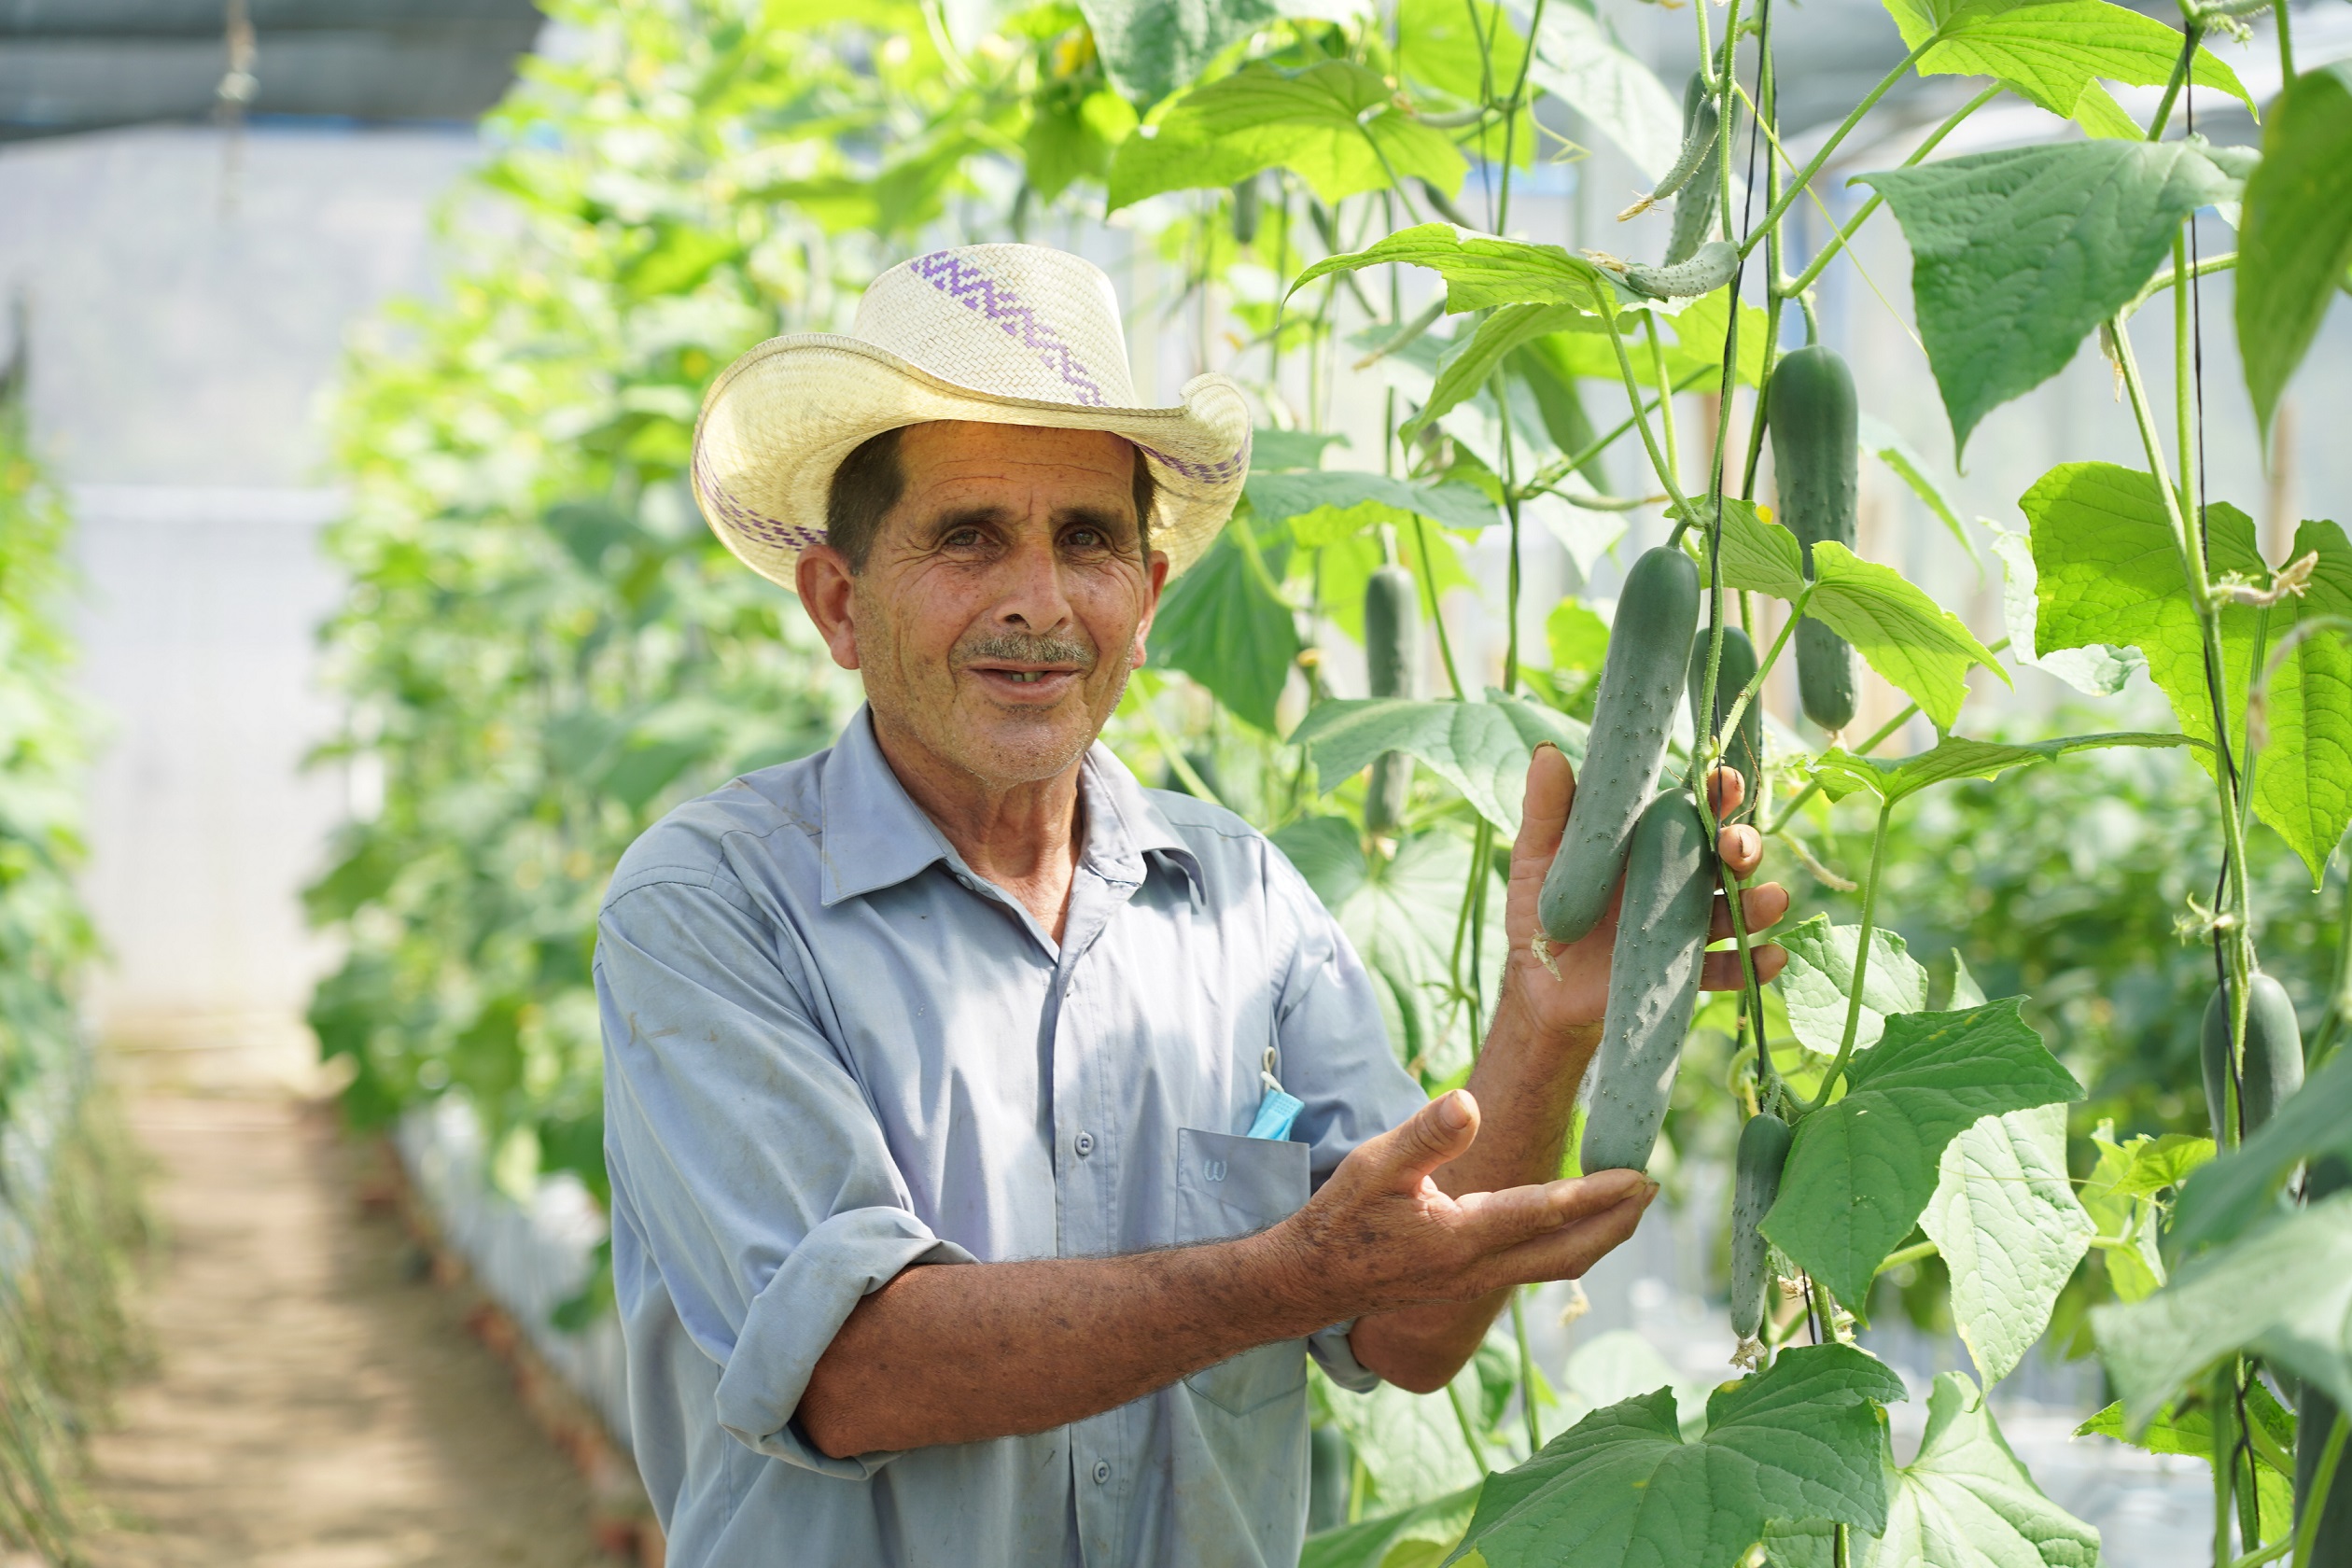 A farmer in El Salvador stands next to one of his plants